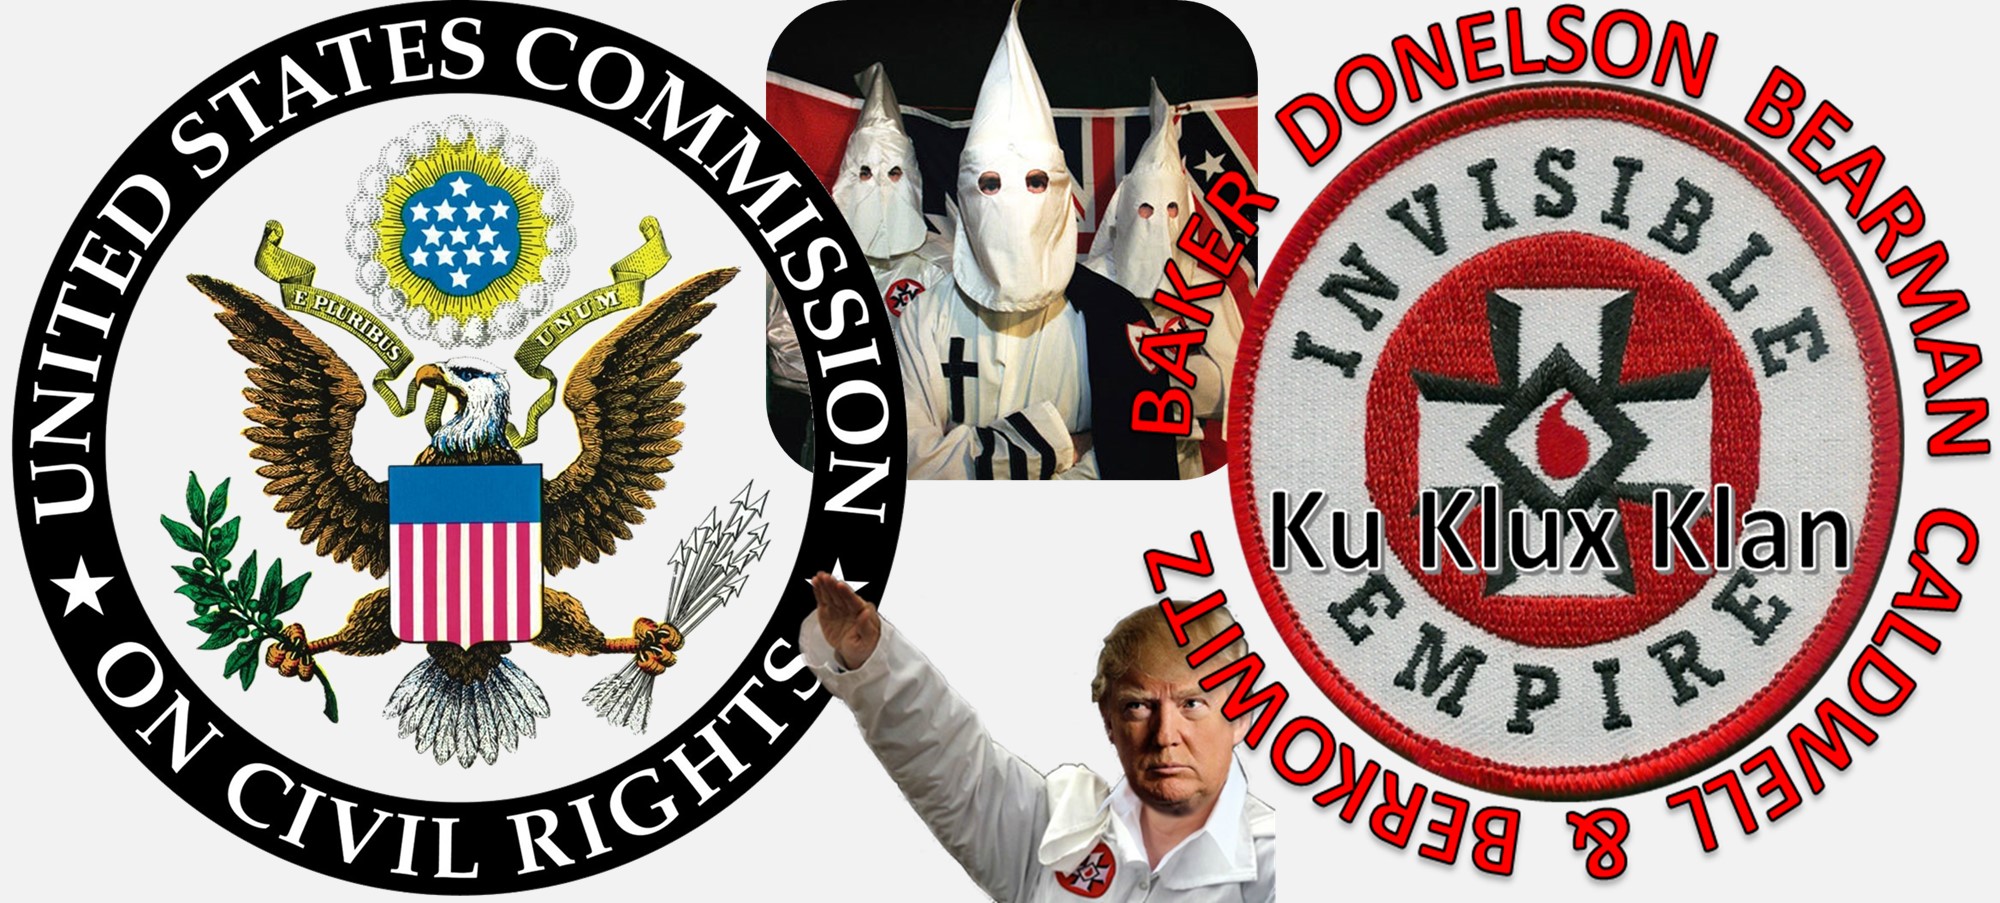 BAKER DONELSON United States Commission On Civil Rights